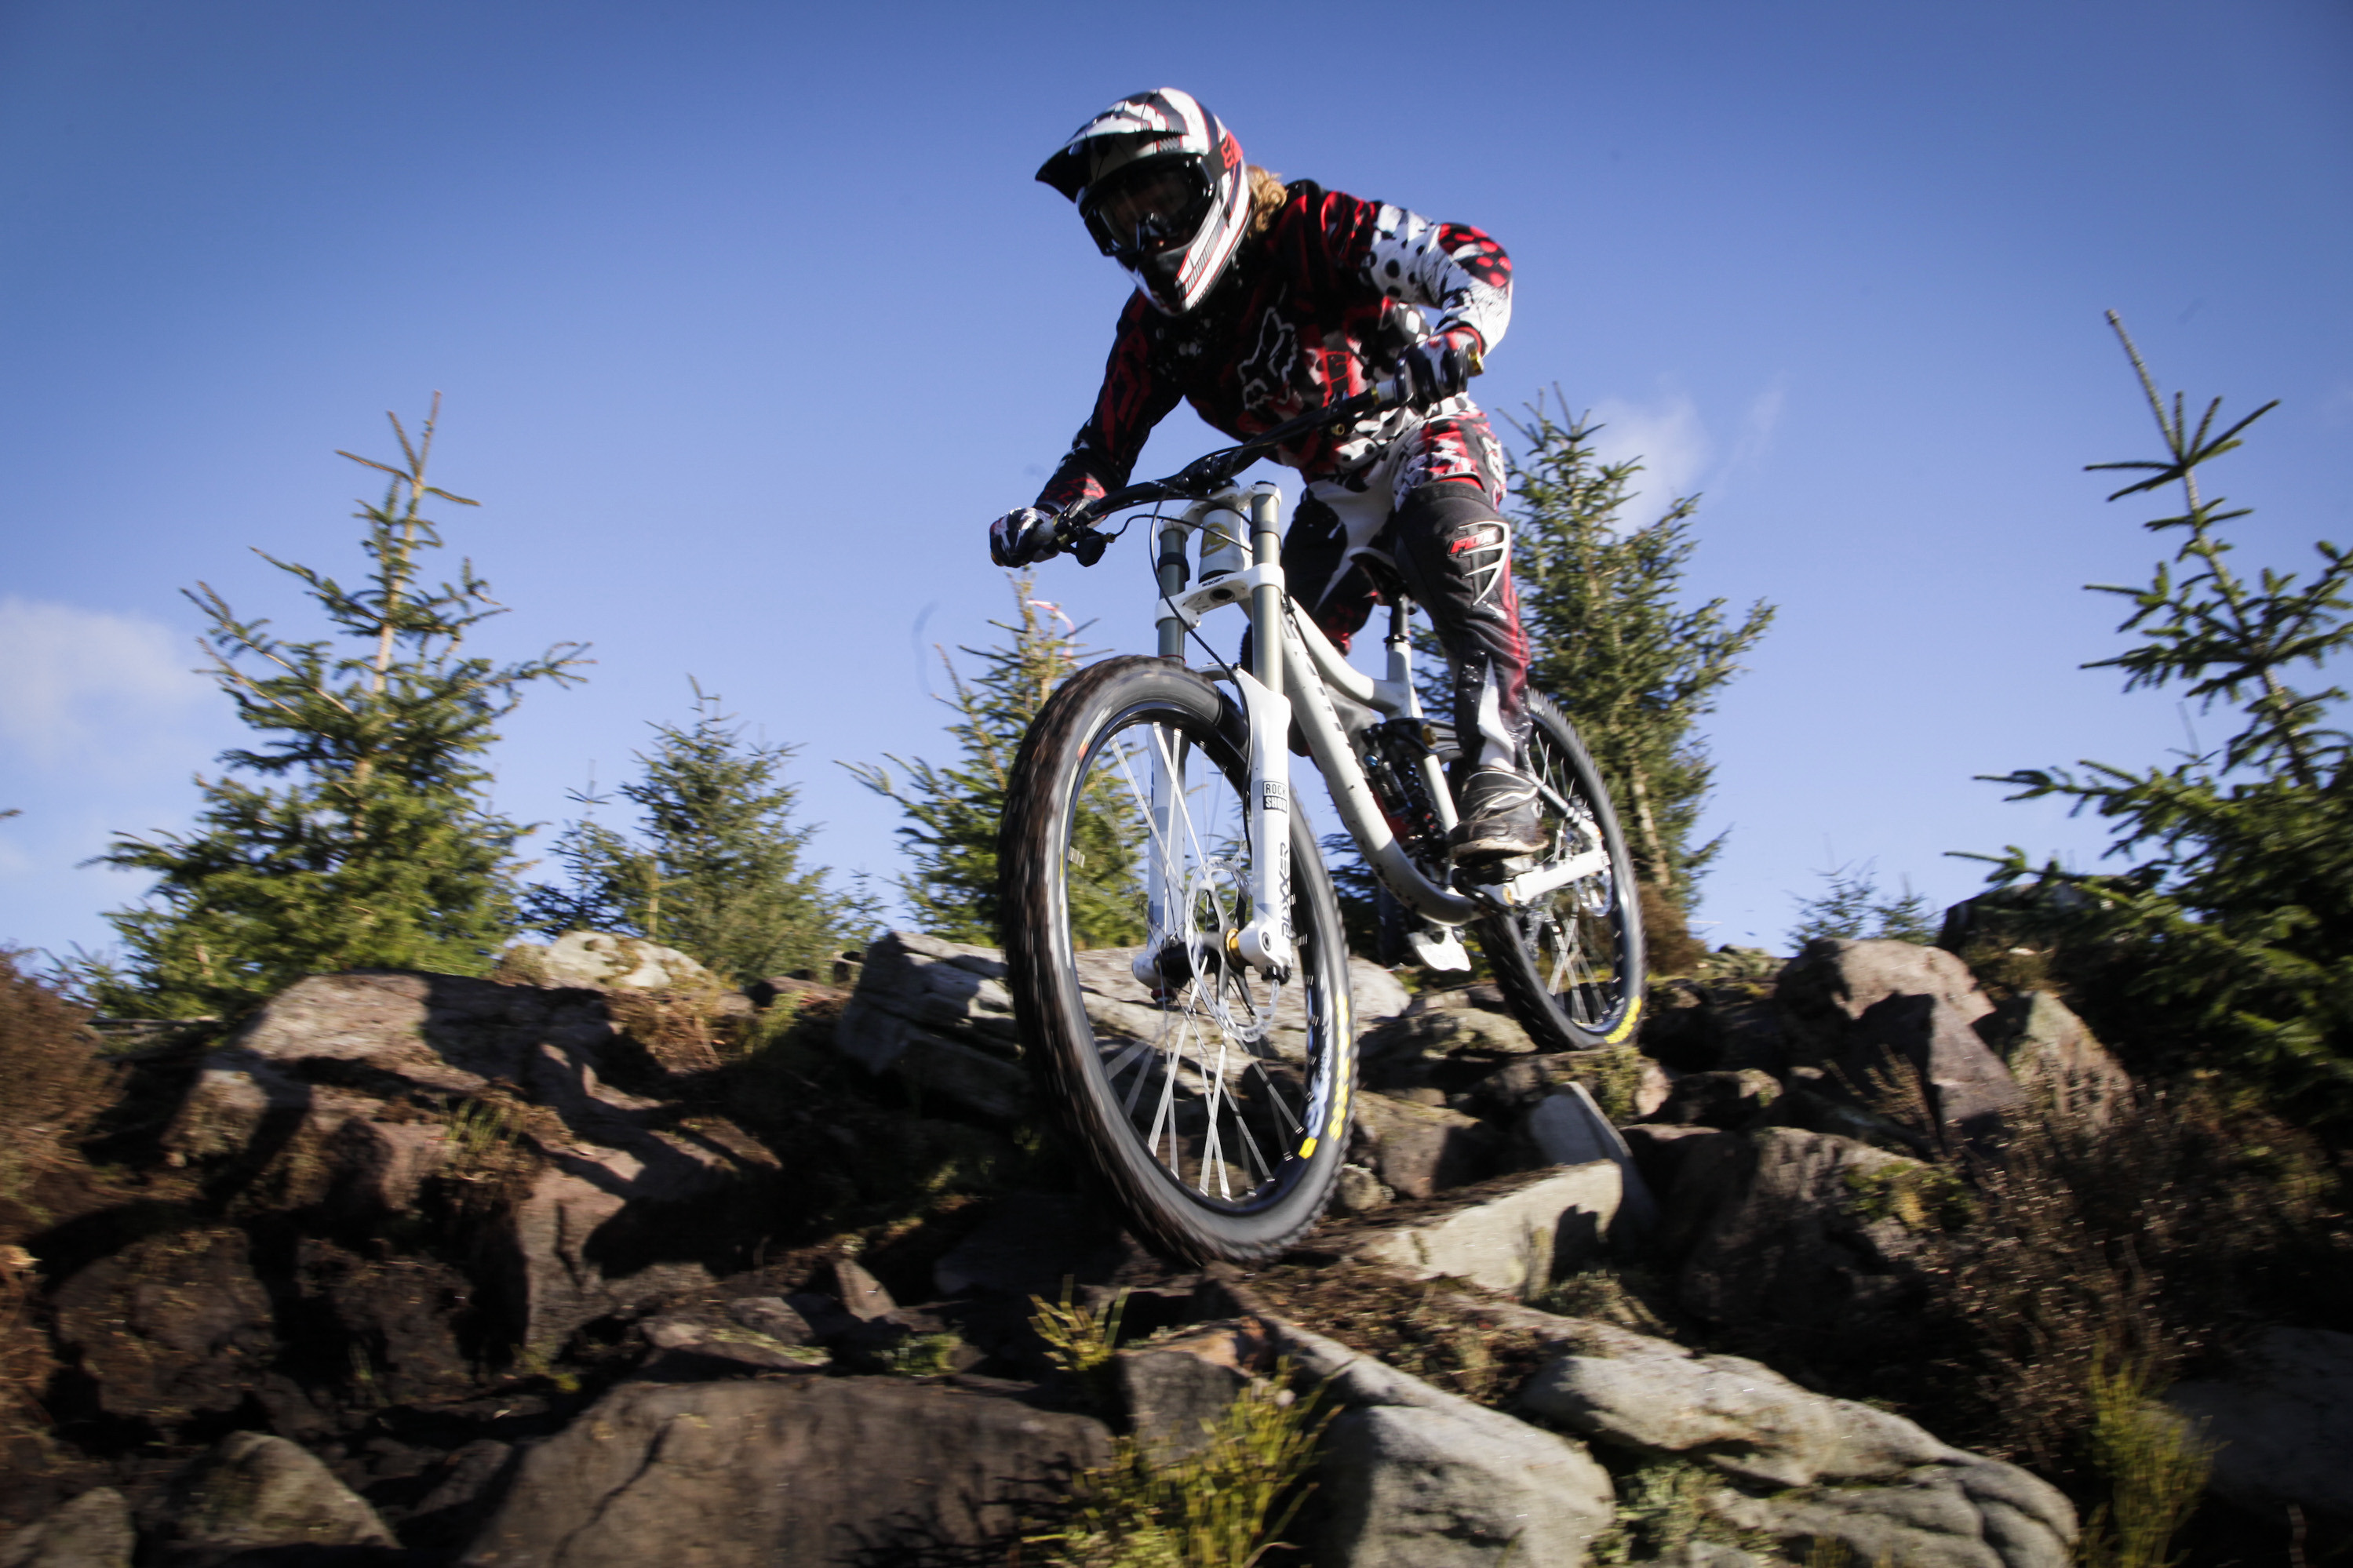 Building England S One Of Longest Downhill Mountain Biking Routes On